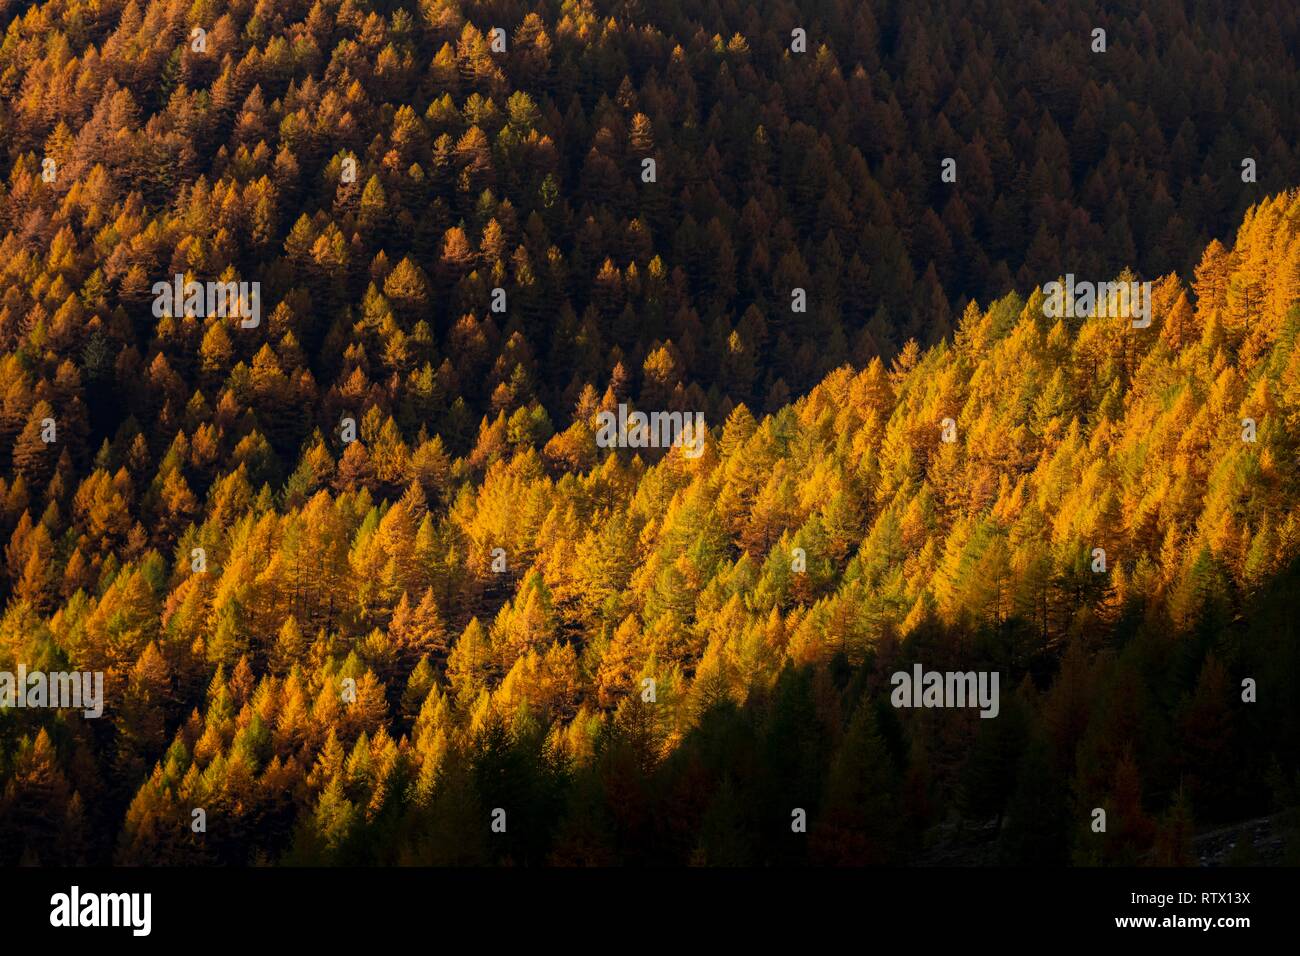 Autumn mountain larch forest (Larix decidua) with light and shade, Vals, Valstal, South Tyrol, Italy Stock Photo